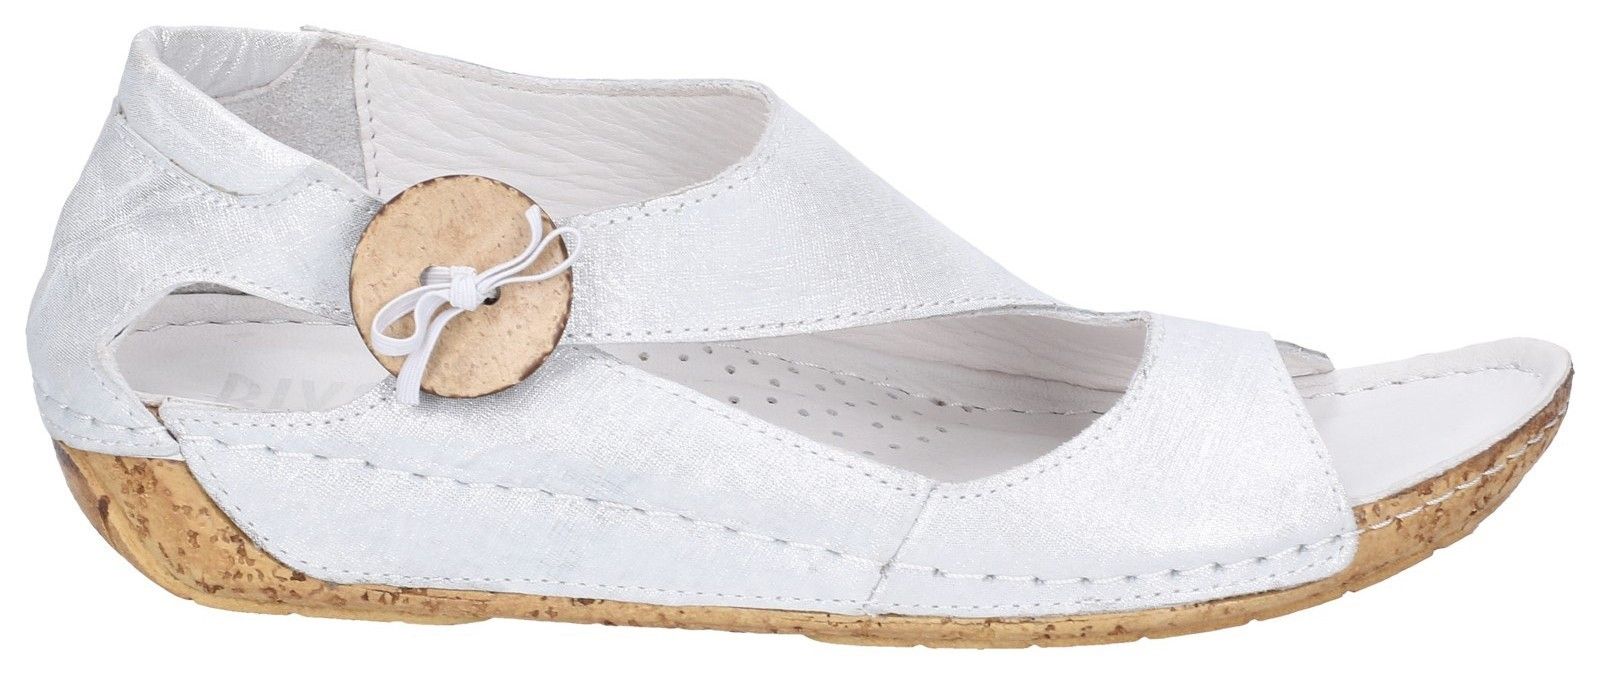 Charming slip-on open toe casual shoe crafted with luxuriously soft metallic leather uppers. A large button feature hides a stretch comfort fitting elastic panel whilst a low gentle rise and padded foam layered foot bed cushions feet. Women's slip-on open toe summer casual shoe. 
Luxuriously supple metallic leather uppers. 
Large wooden button feature with secret elastic fittings. 
Large asymmetric breathable cut out panel. 
Closed back with inner suede heel grip.